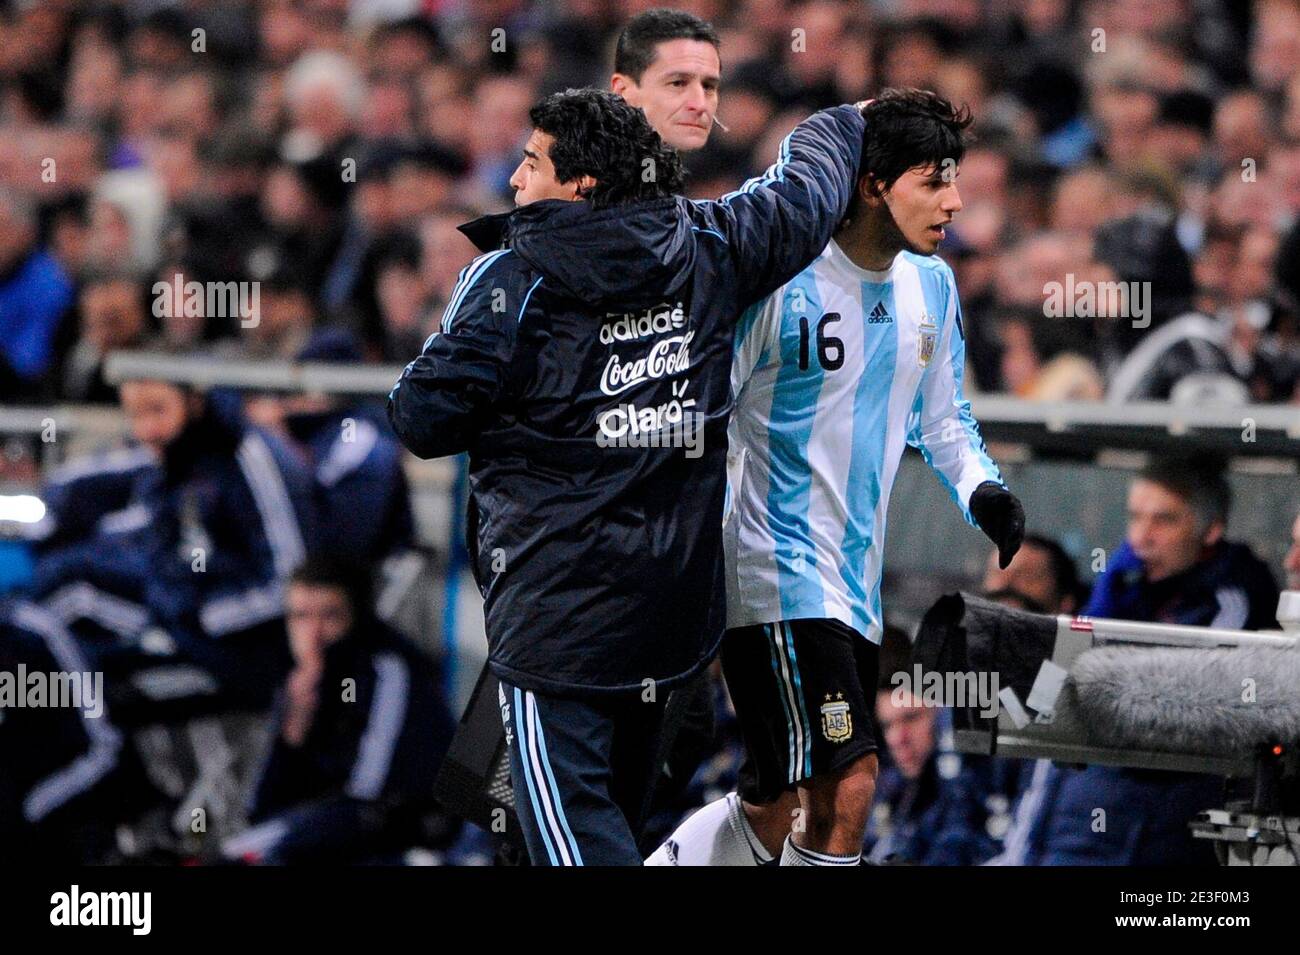 Diego Maradona, coach of Argentina congratulates his son in law Sergio Aguero during the friendly international soccer match France vs Argentina in Marseille, France on February 11, 2009.Argentina won 2-0. Photo by Henri Szwarc-Cameleon-ABACAPRESS.COM Stock Photo